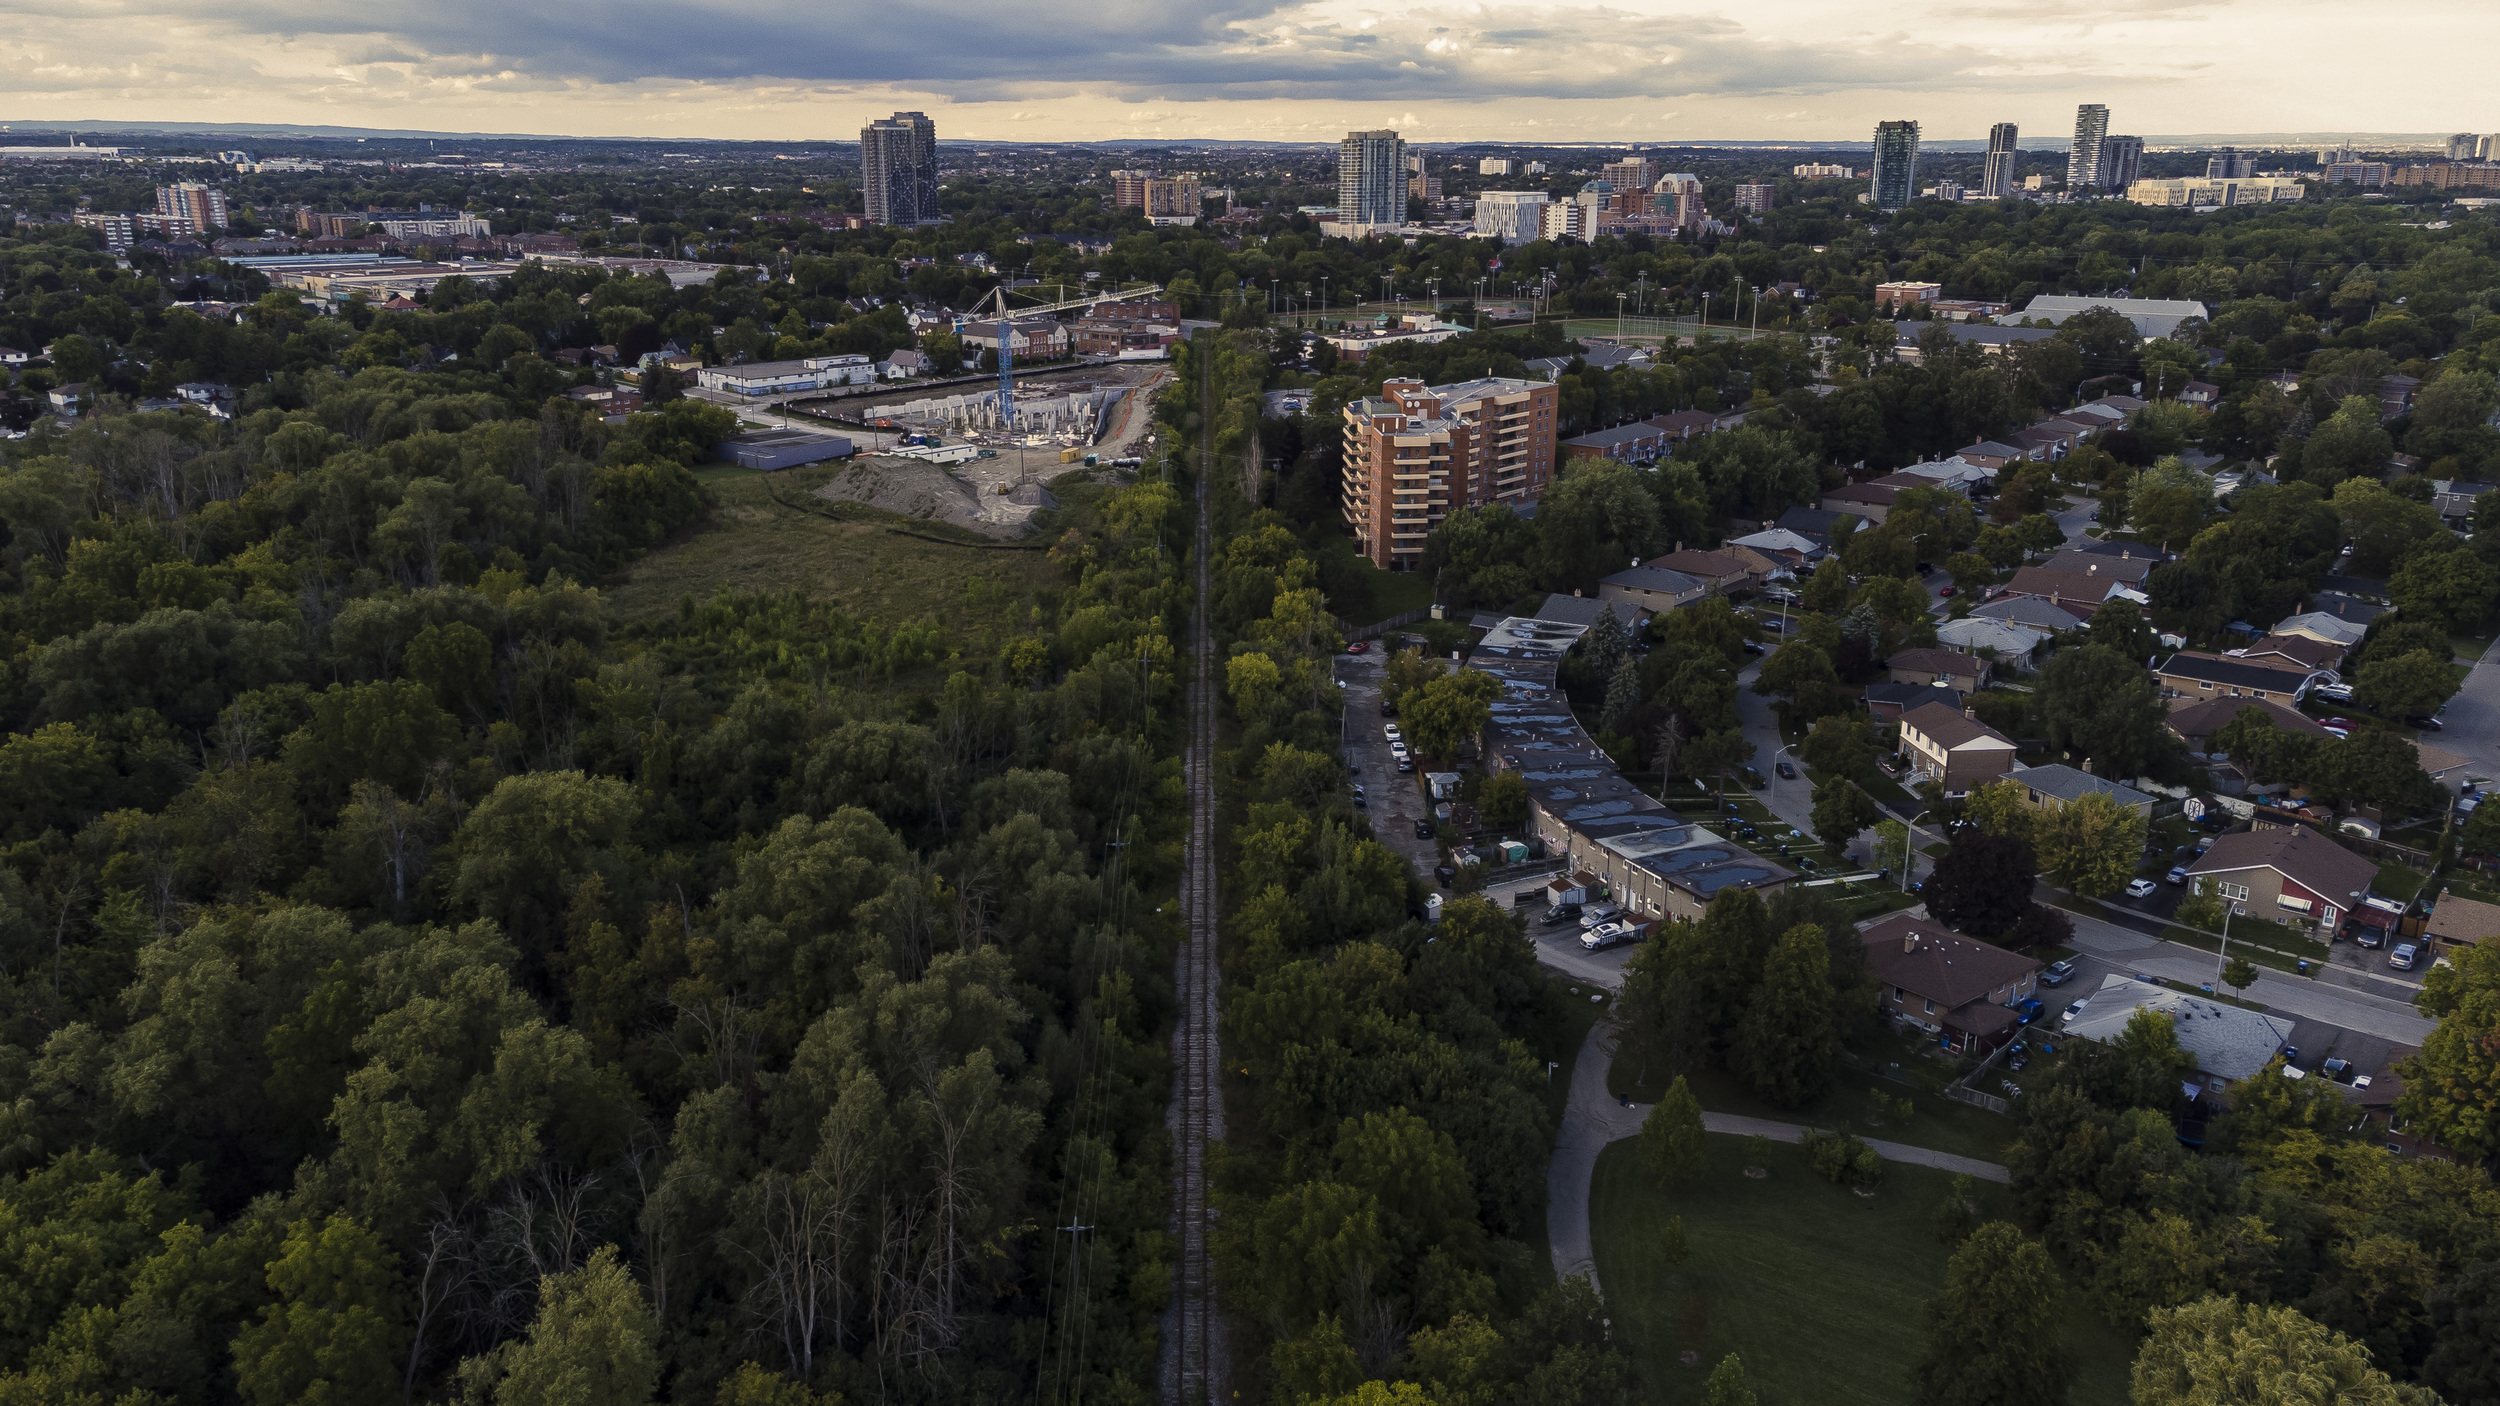 An overhead view of the old railway tracks through Brampton's core, where the Peel Region rail trail would be created.